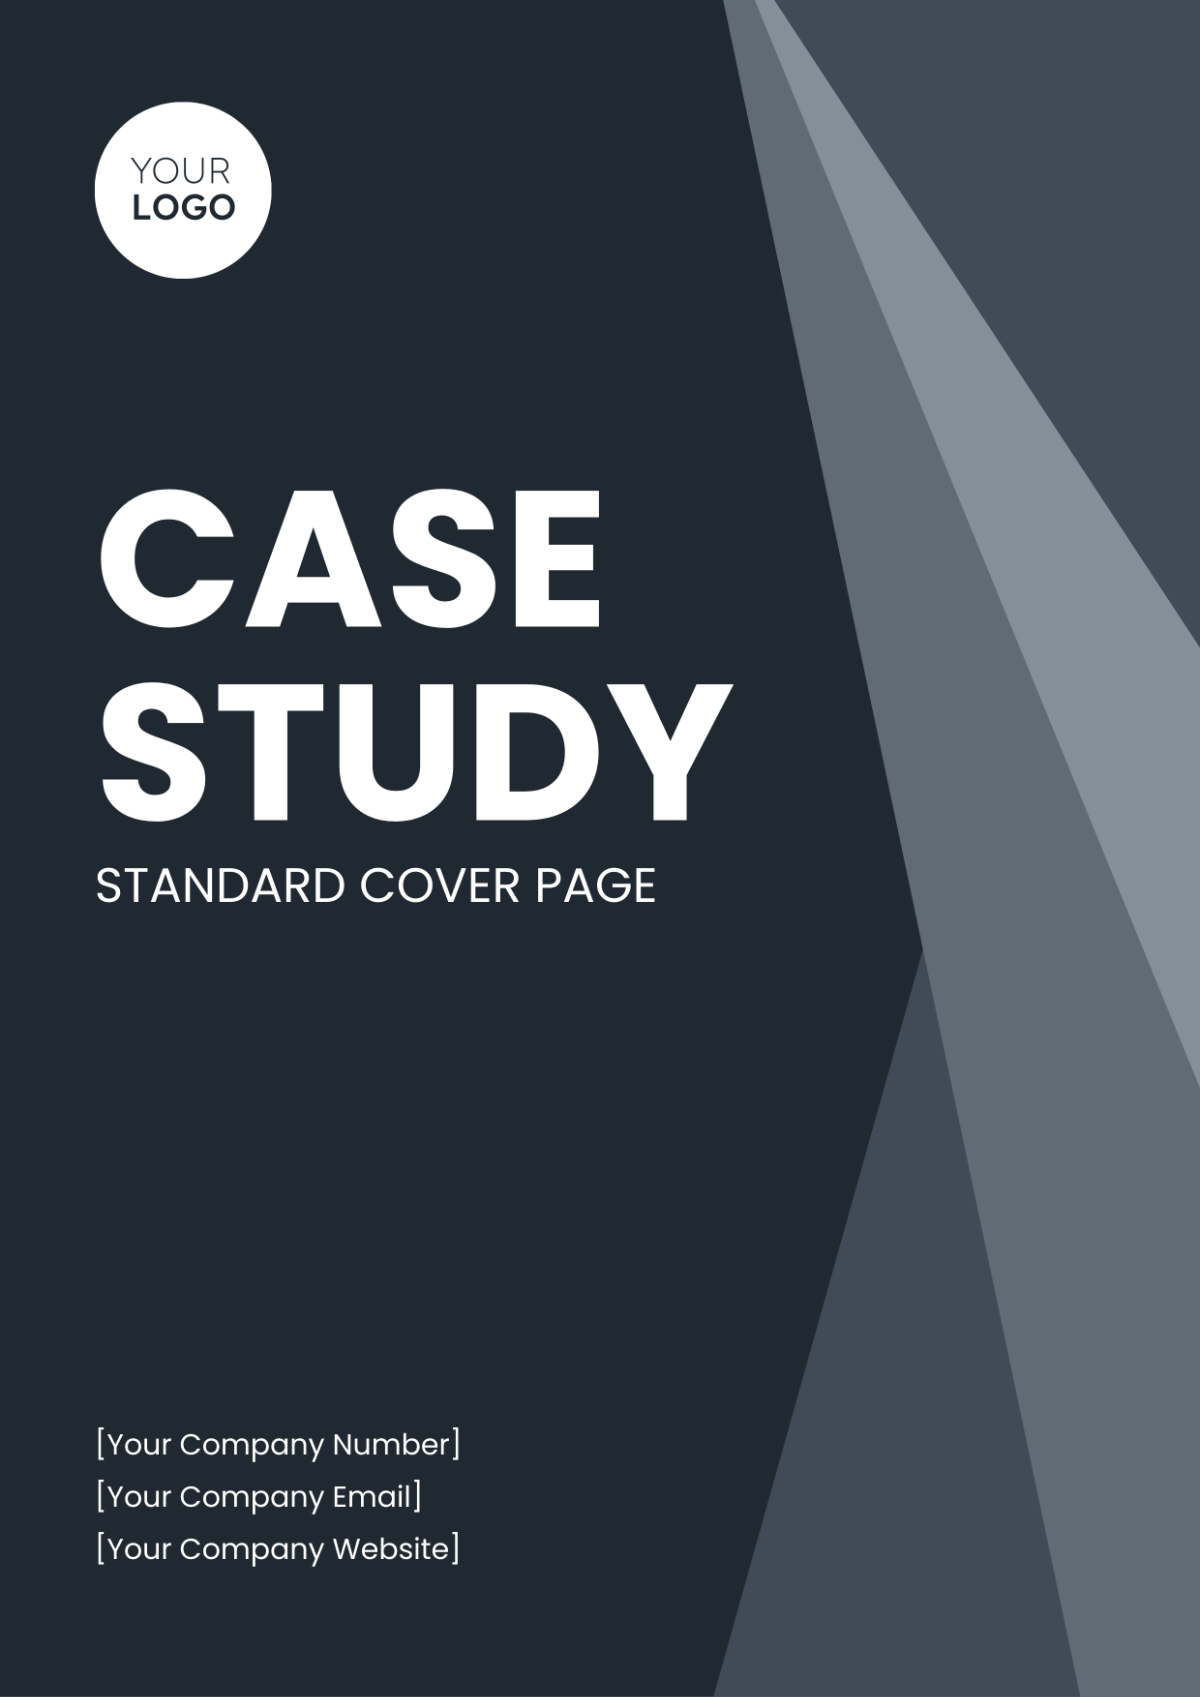 Case Study Standard Cover Page Template